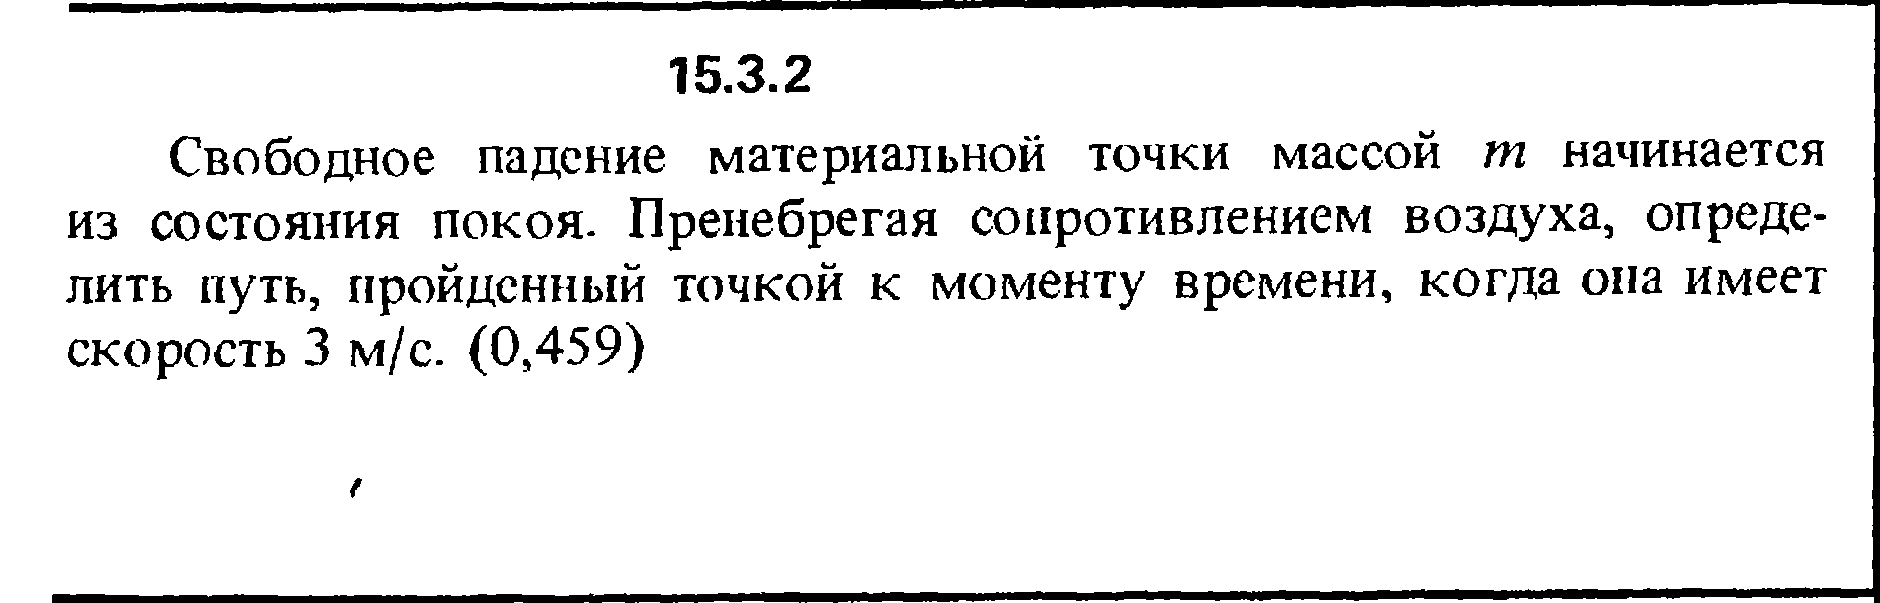 Solution 15.3.2 collection of Kep OE 1989